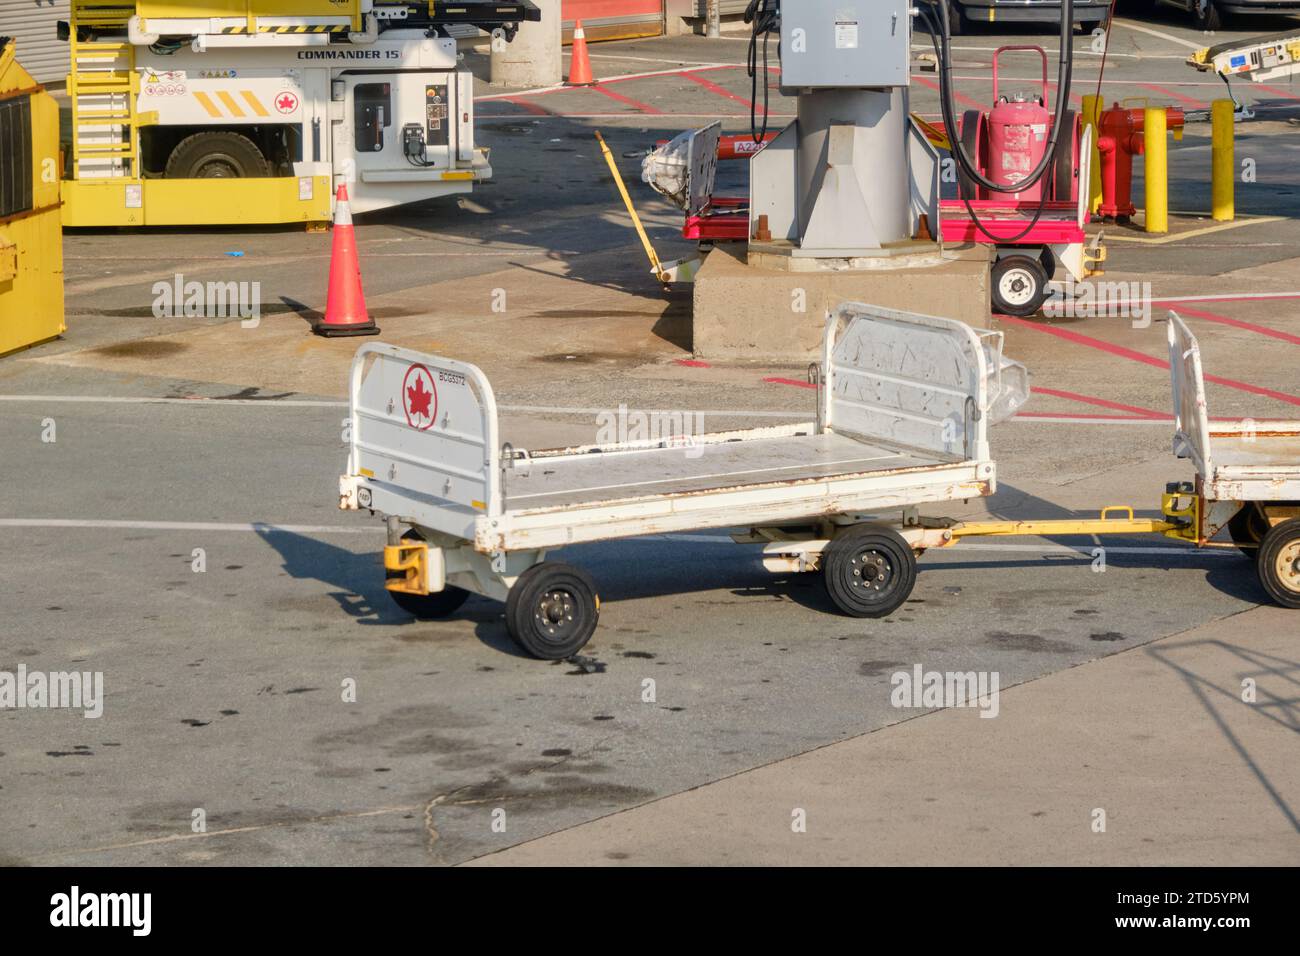 Empty Air Canada Luggage mover on the runaway of airport Stock Photo